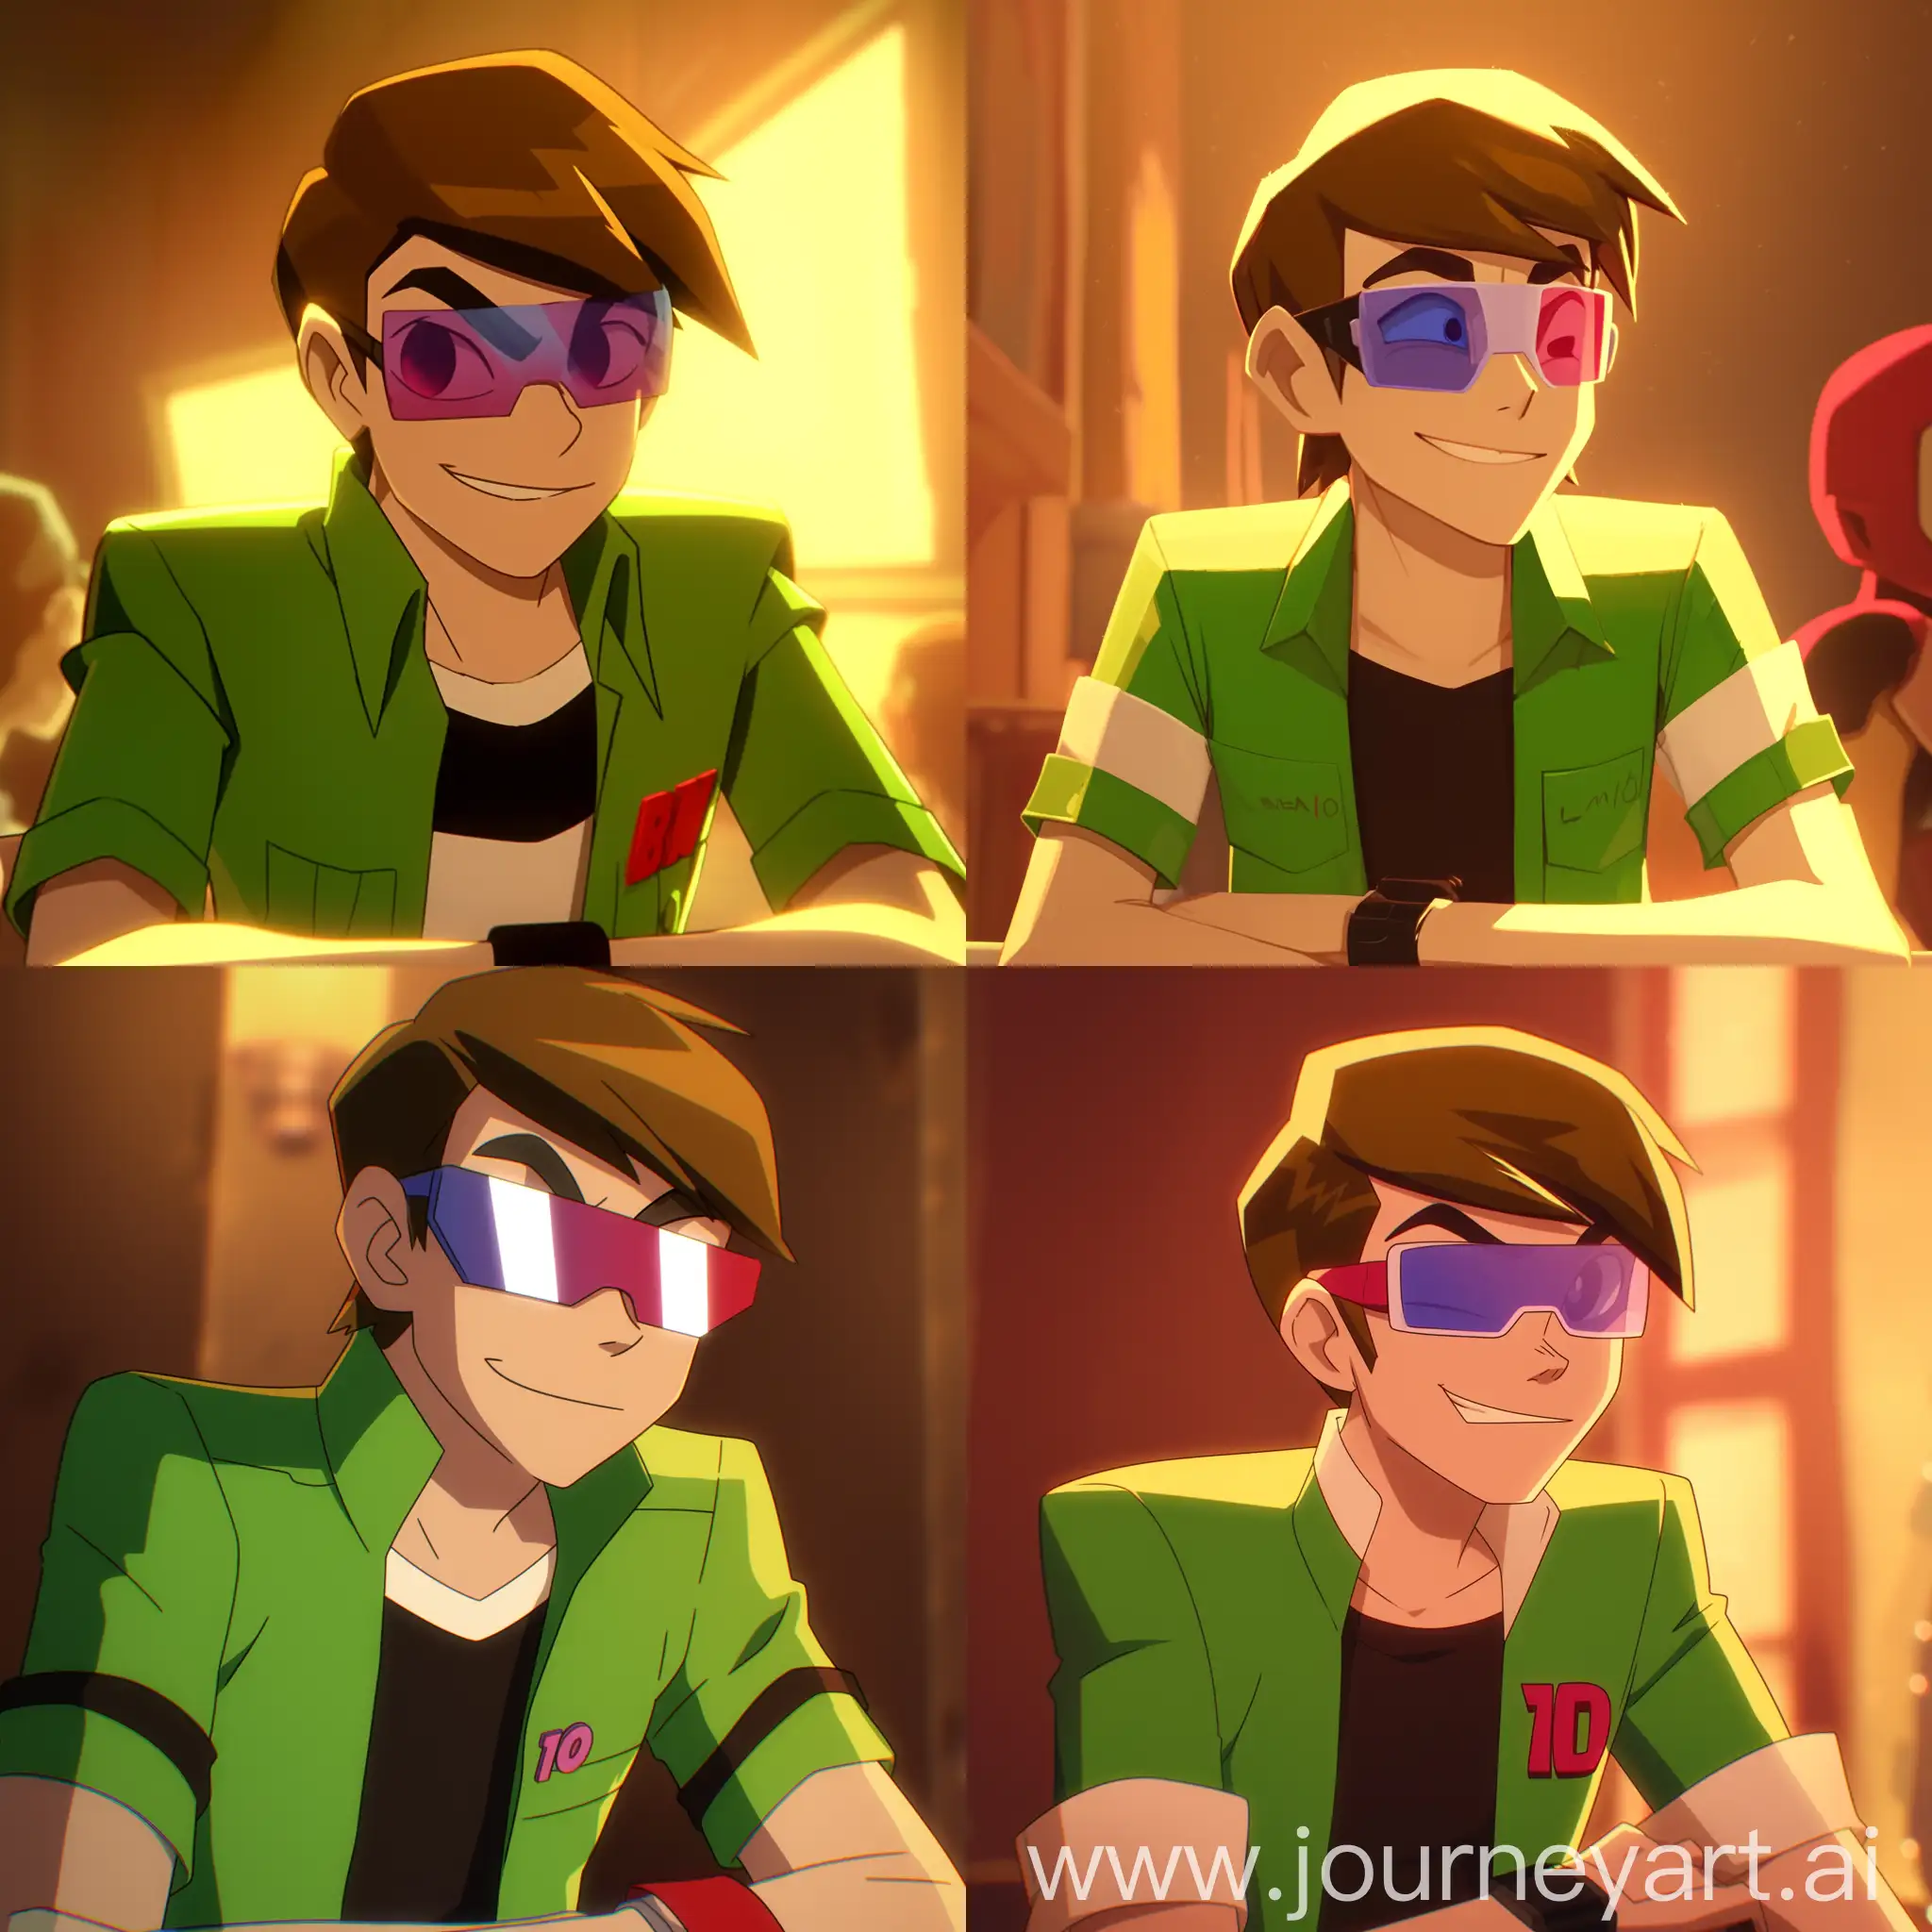 Ben-10-Animated-Character-Smirking-in-Yellow-Jacket-with-Unique-Glasses